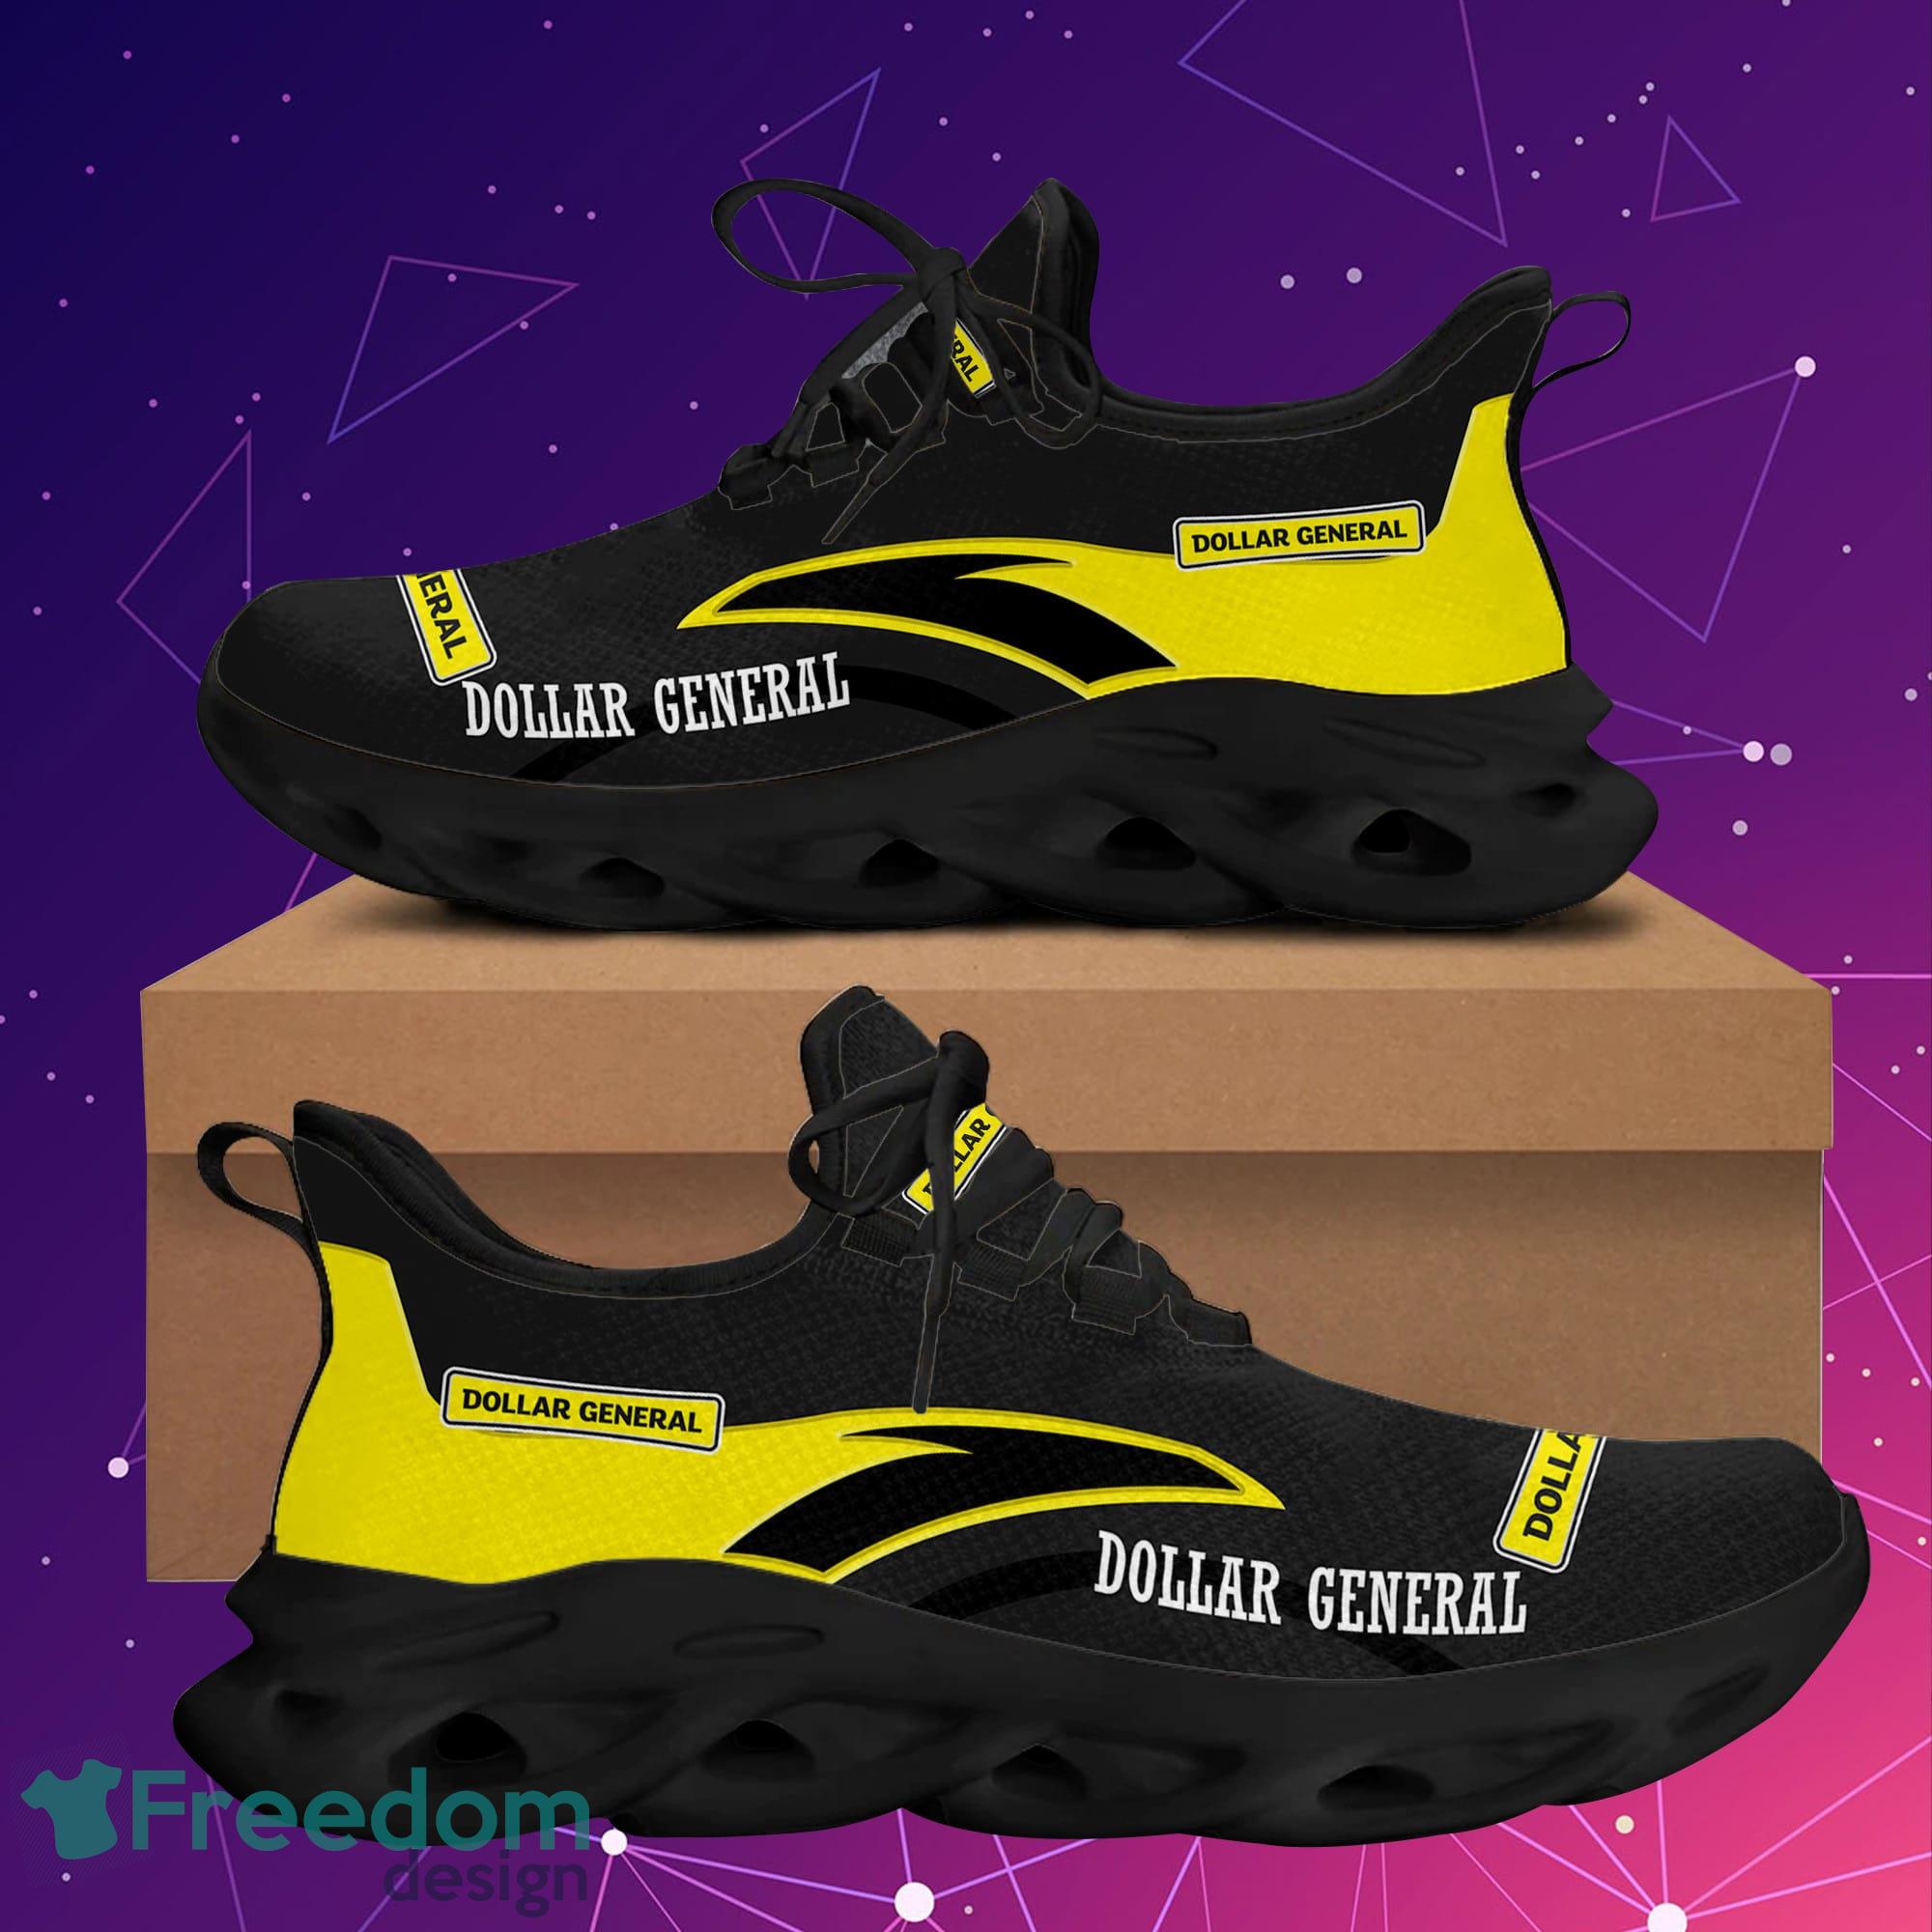 Dollar General Max Soul Sneaker Shoes Gifts For Your Favorite Fan